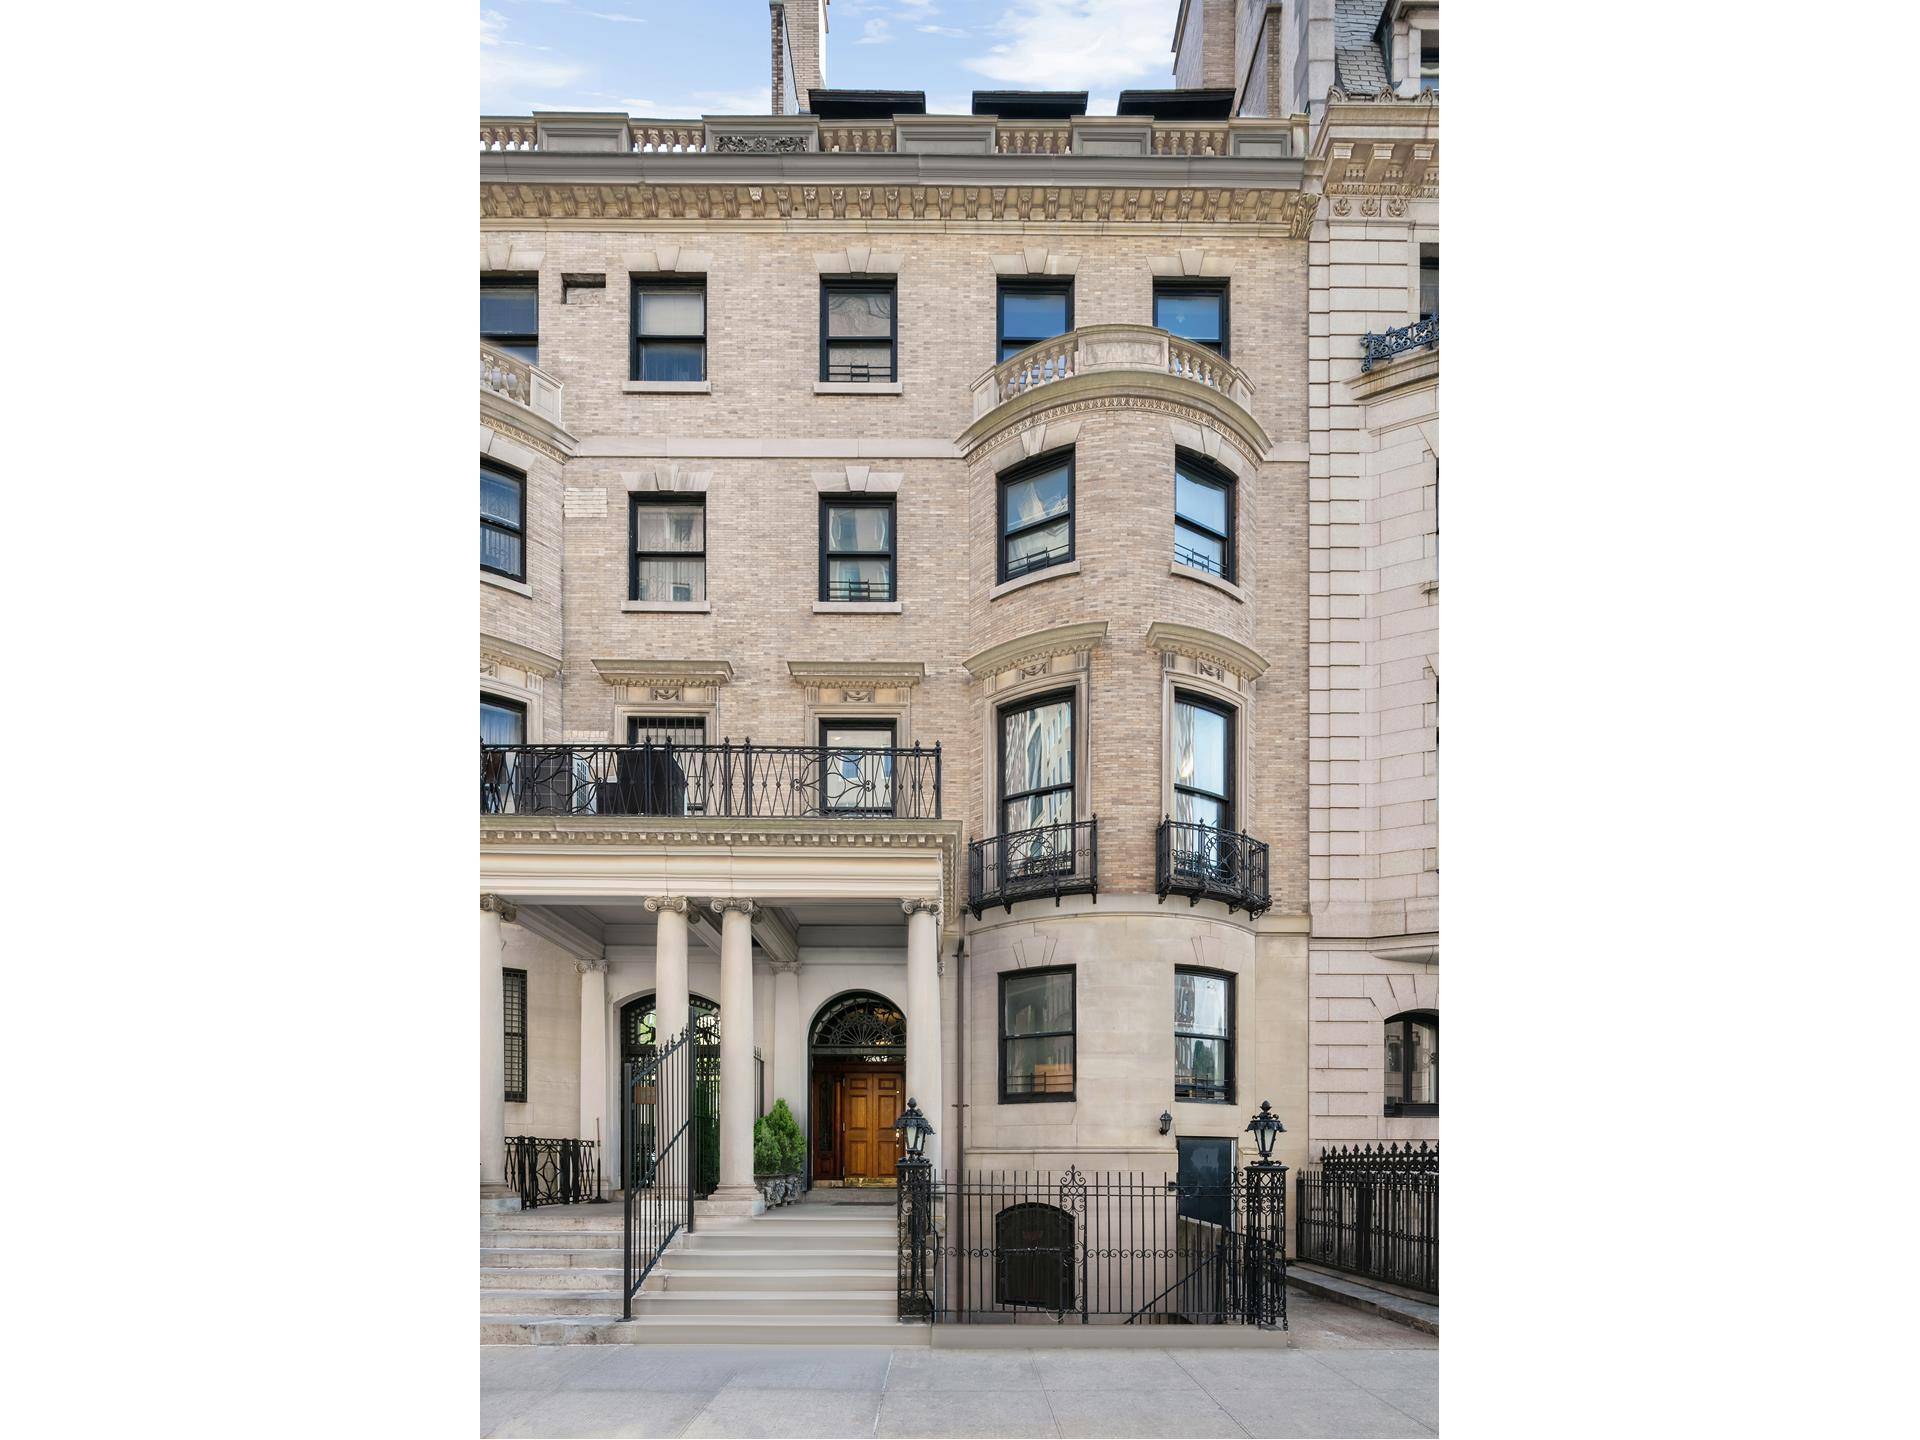 Exquisite and historic 12 East 79th Street is a rare prized property on one of Manhattan's most coveted blocks, graced by the most imposing series of impeccably preserved townhouses in ...